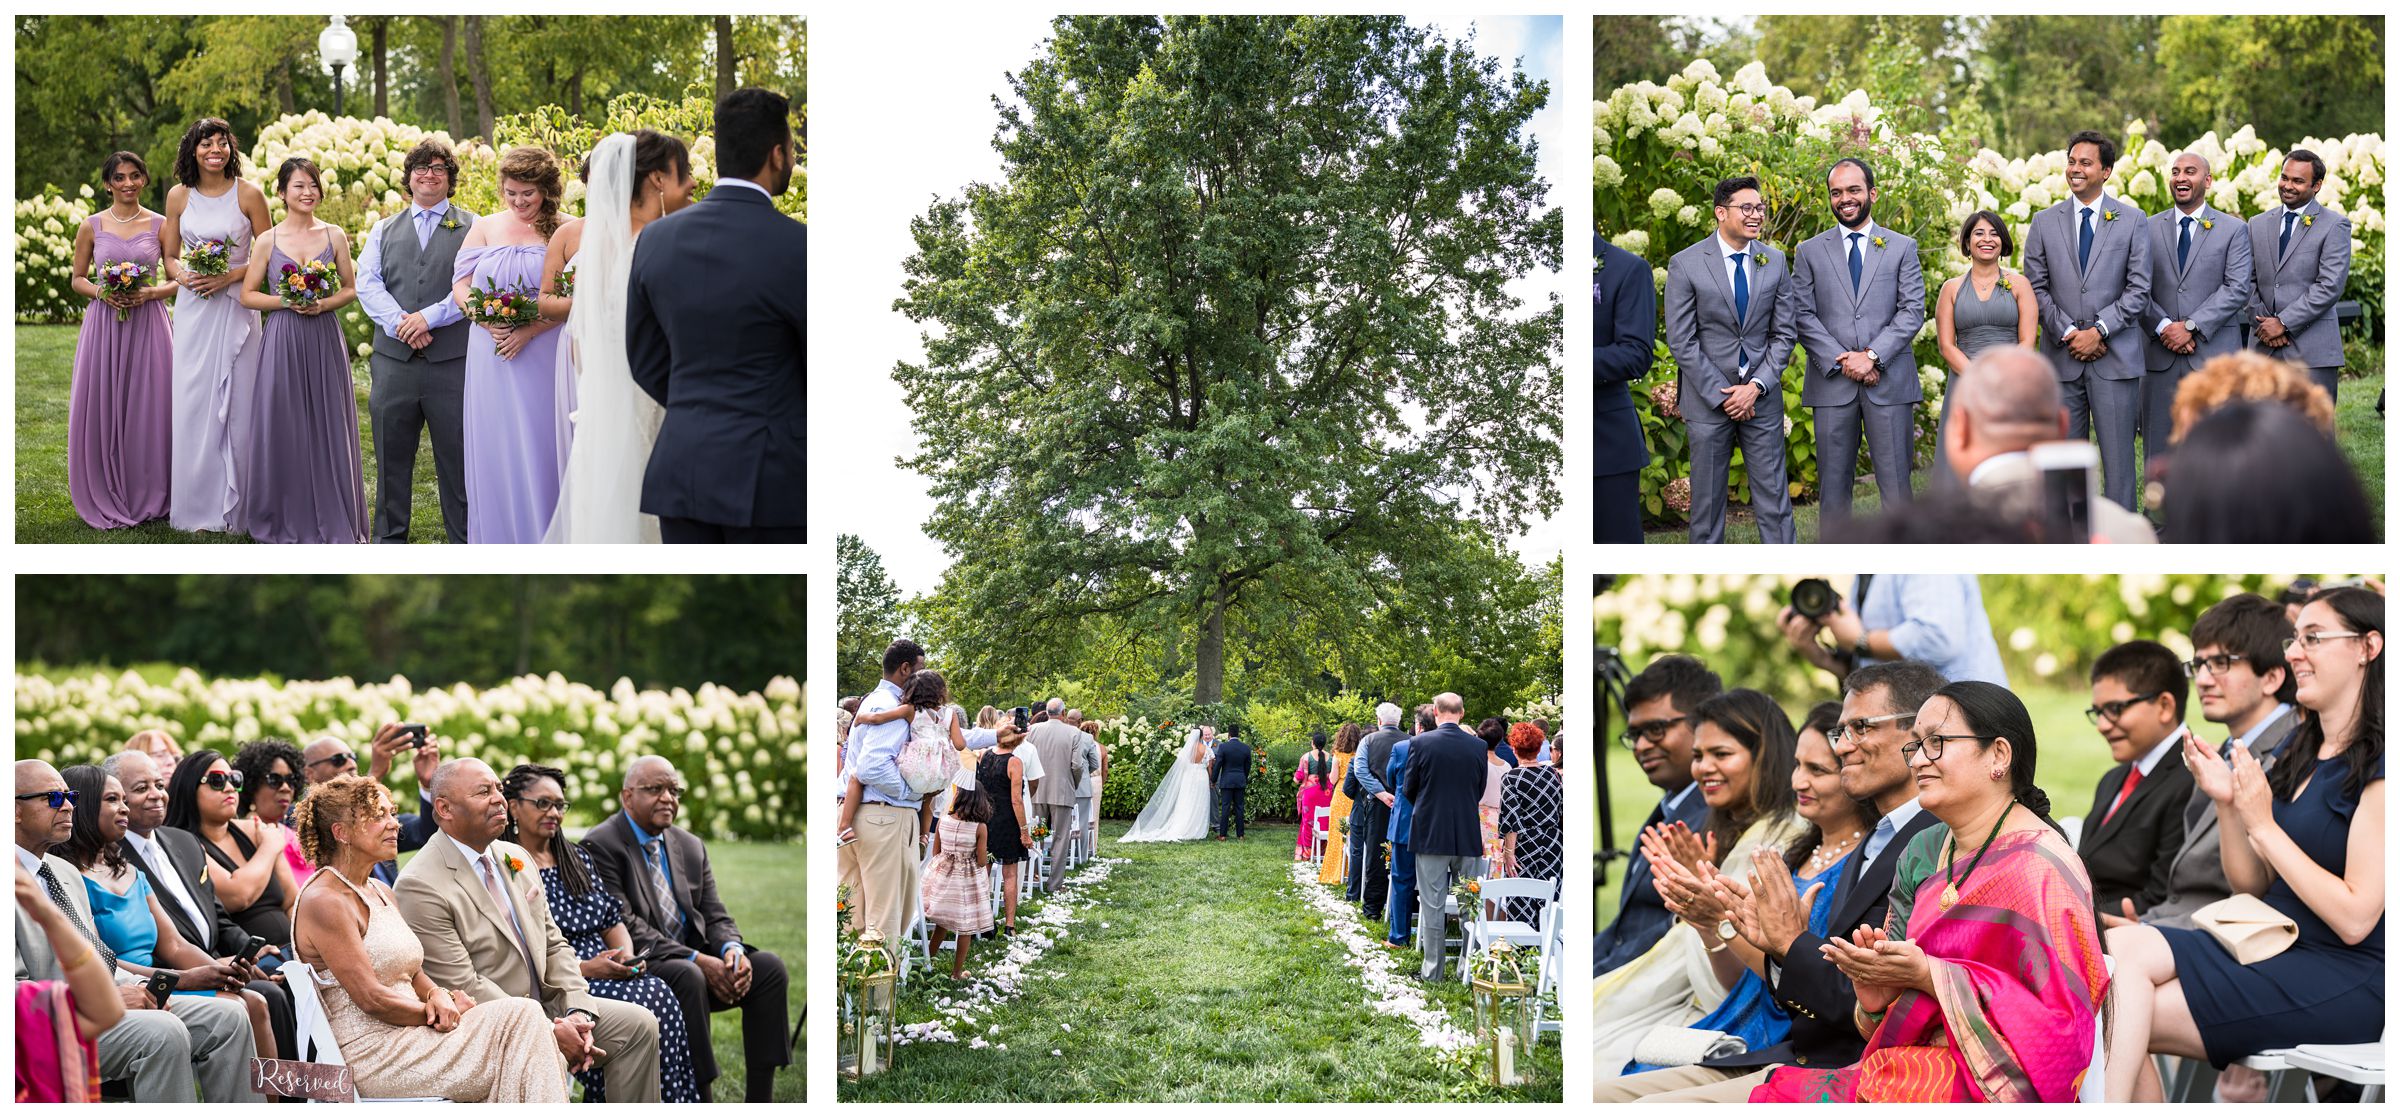 diverse wedding party and family members watch wedding ceremony with Indian and African American influences at Jorgensen Farms in Columbus